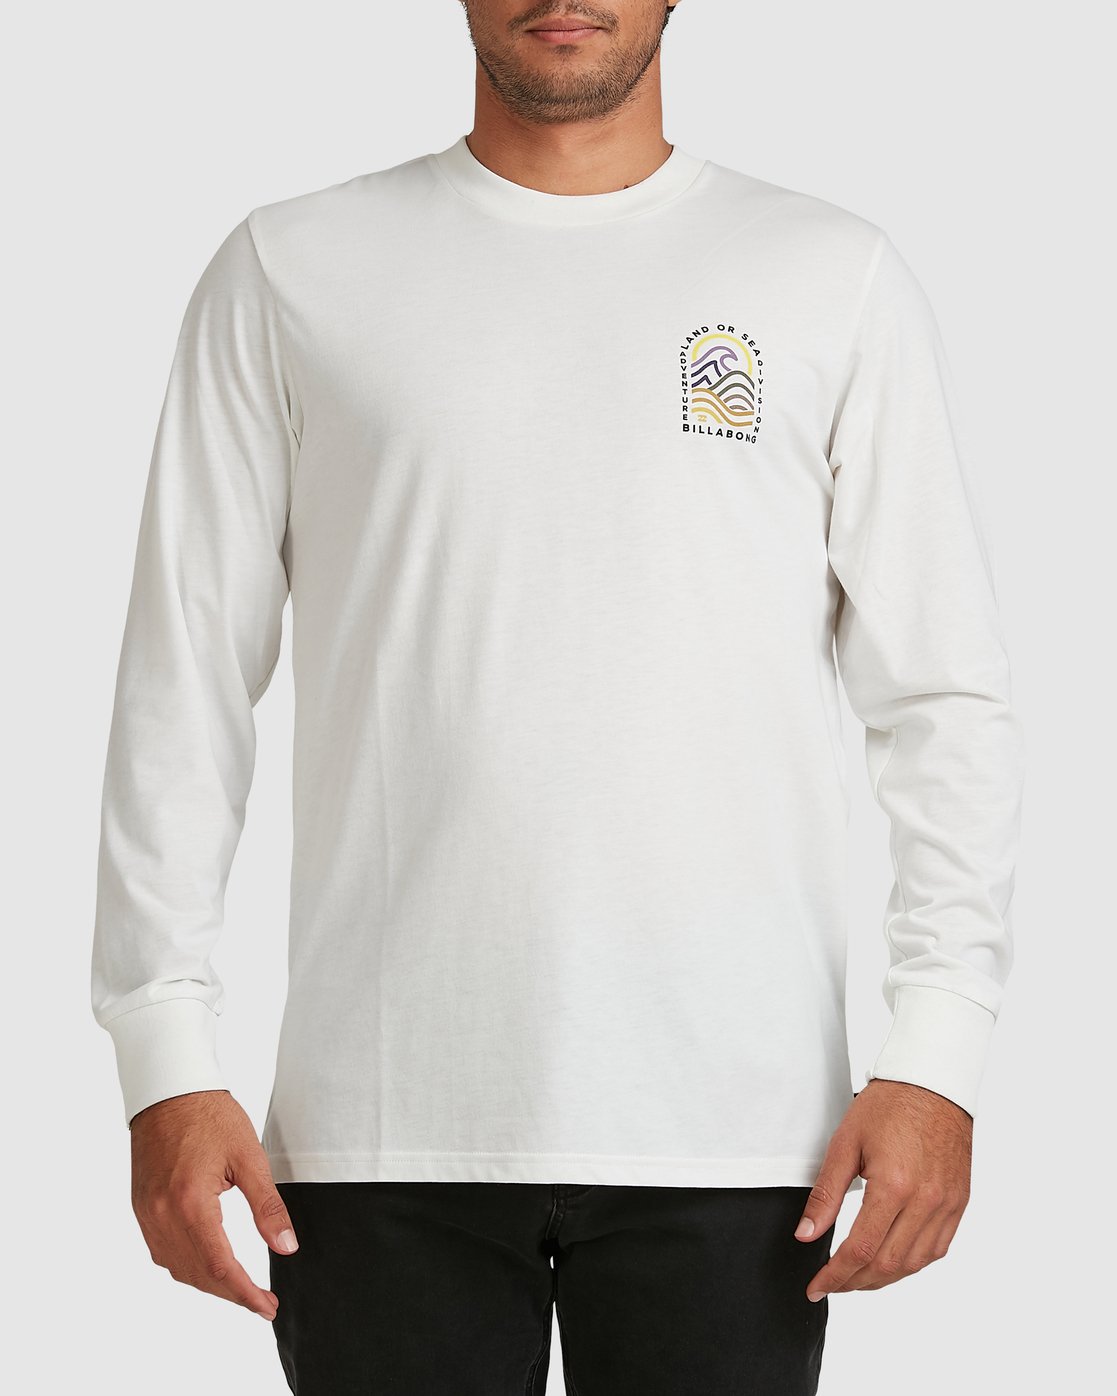 Billabong Adventure Division Transition Long Sleeve Tee Off white